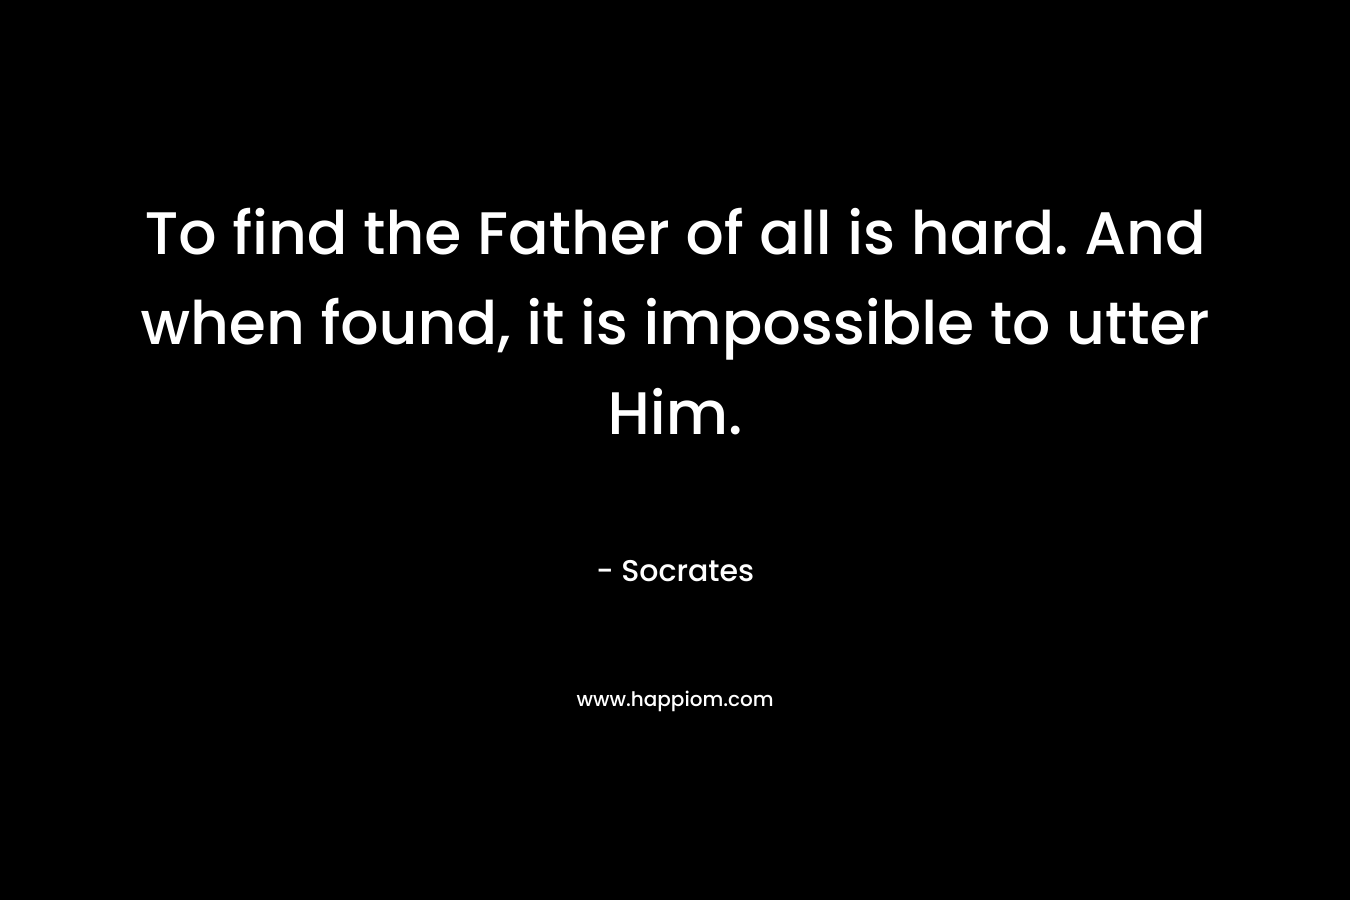 To find the Father of all is hard. And when found, it is impossible to utter Him.